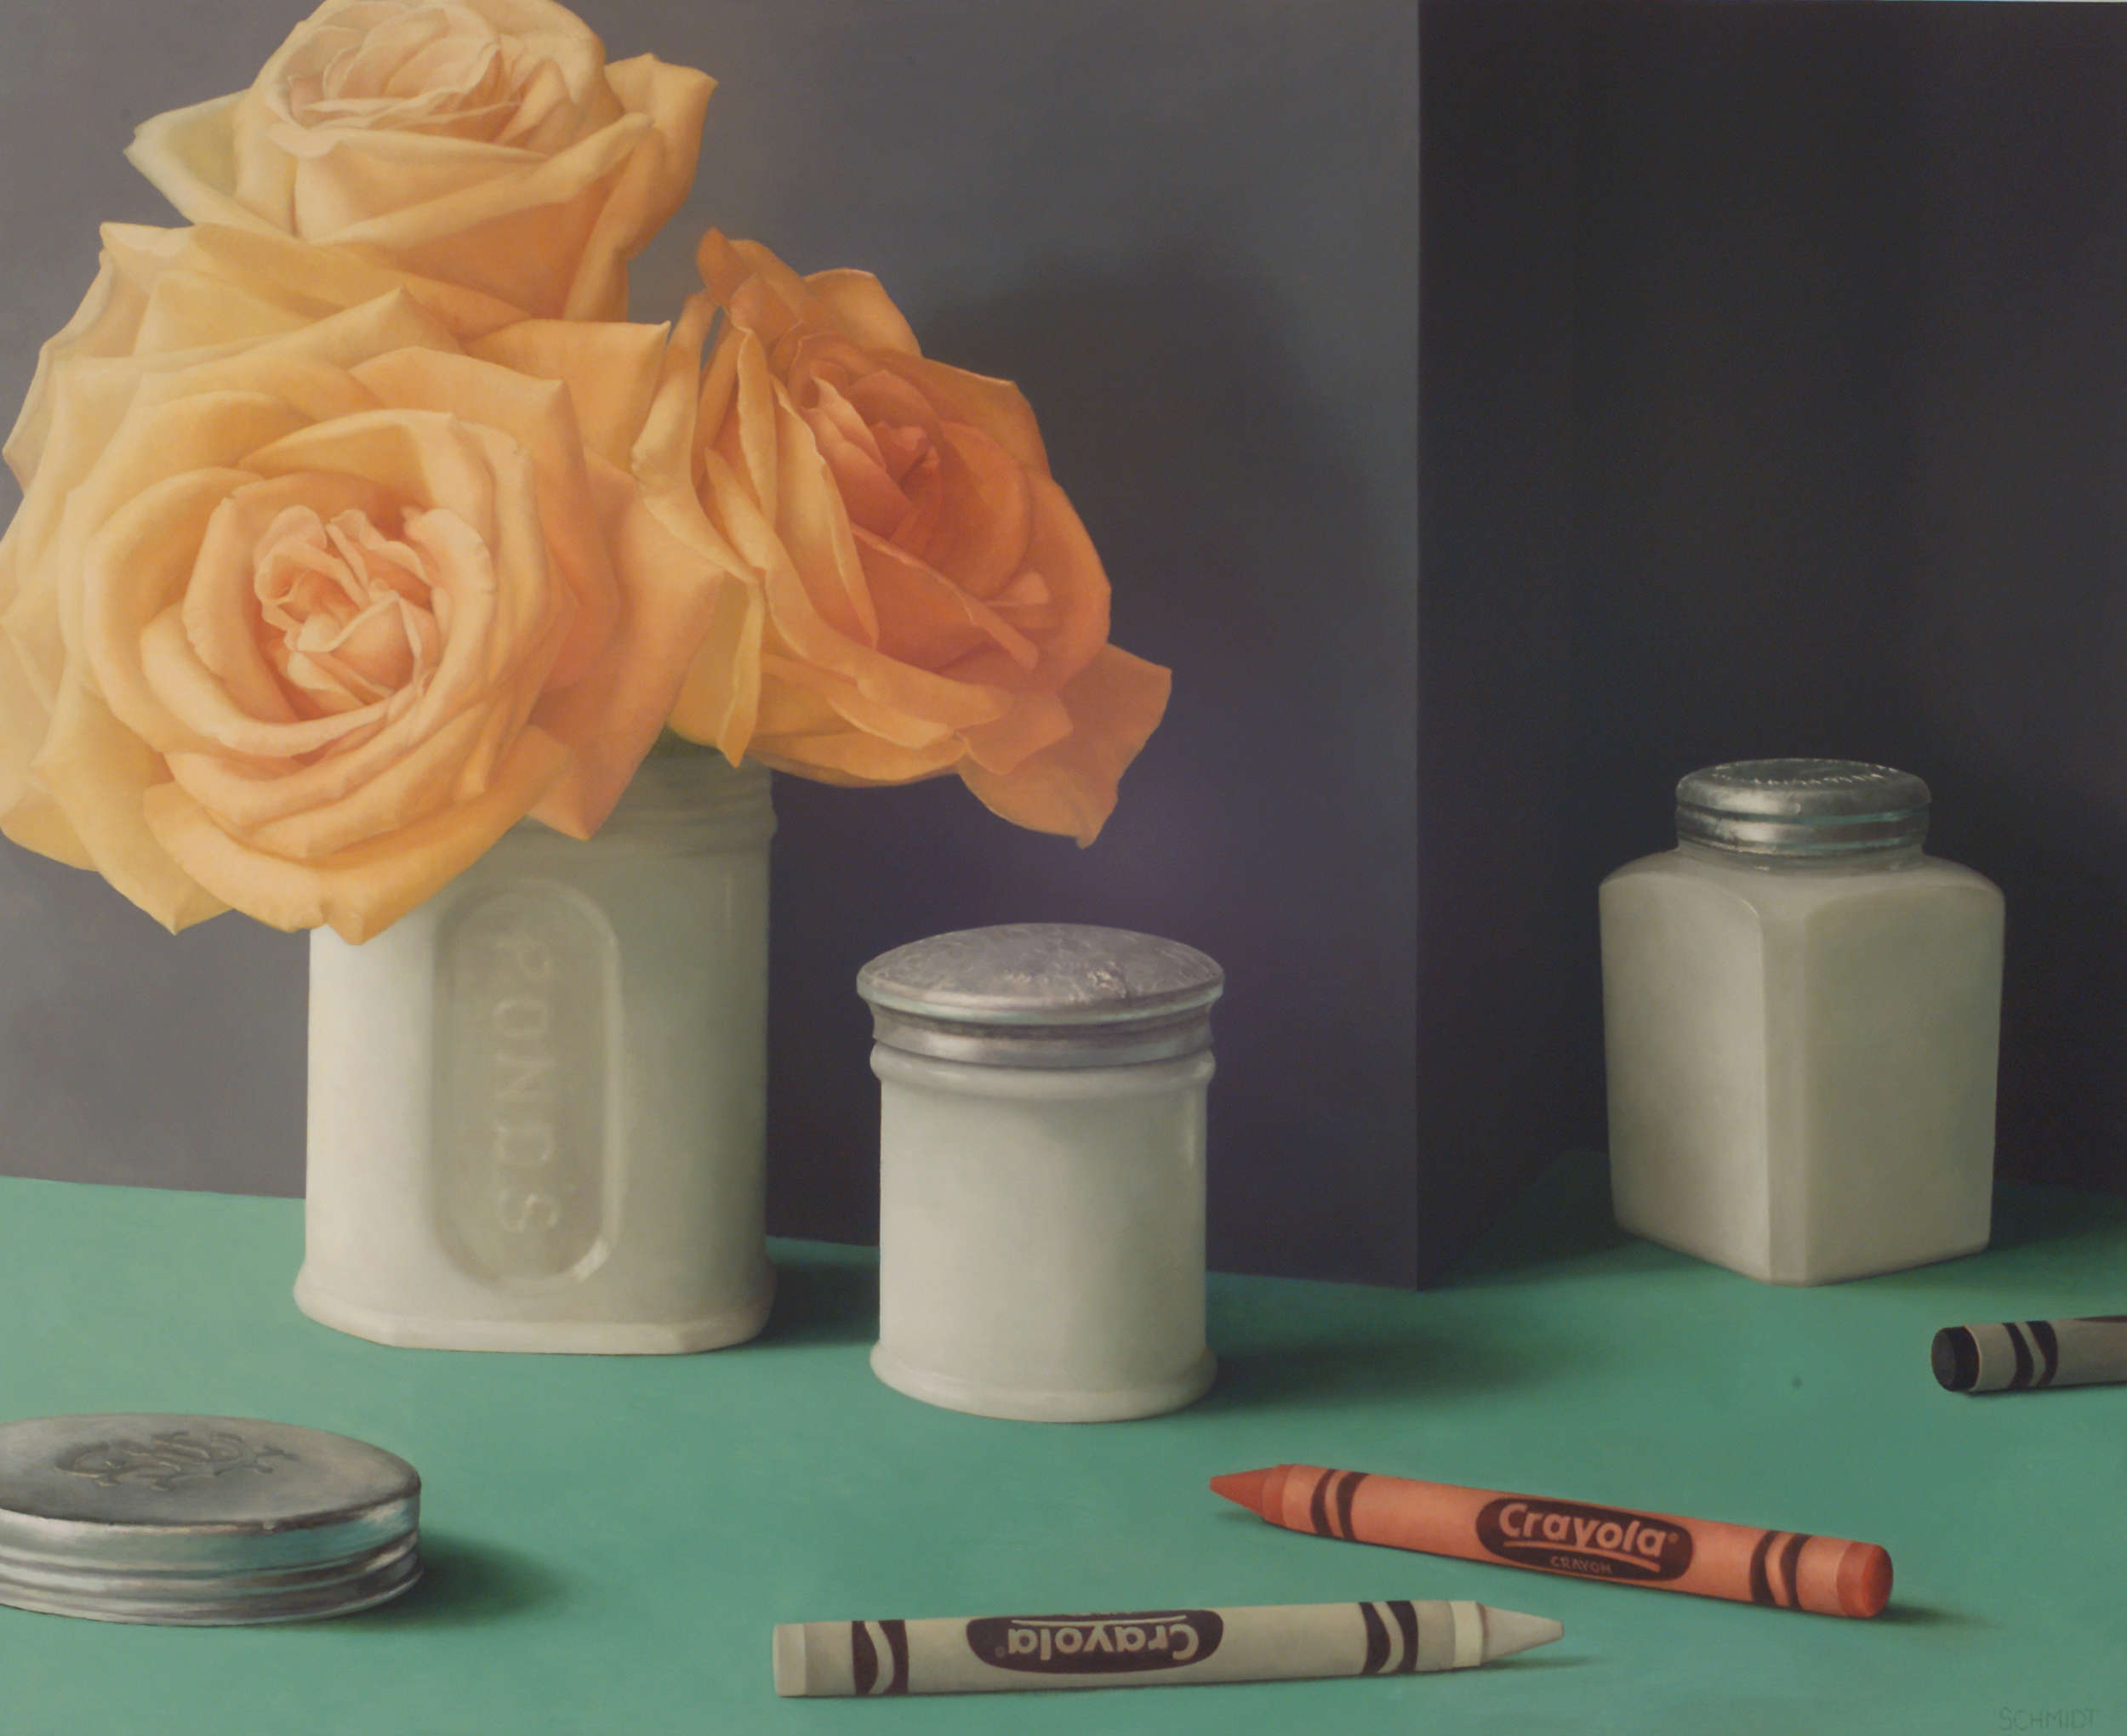 Antique milk glass pond's cold cream jar, 2 other white glass jars with tin lids, tin lid on floor, crayola crayons, giant orange roses